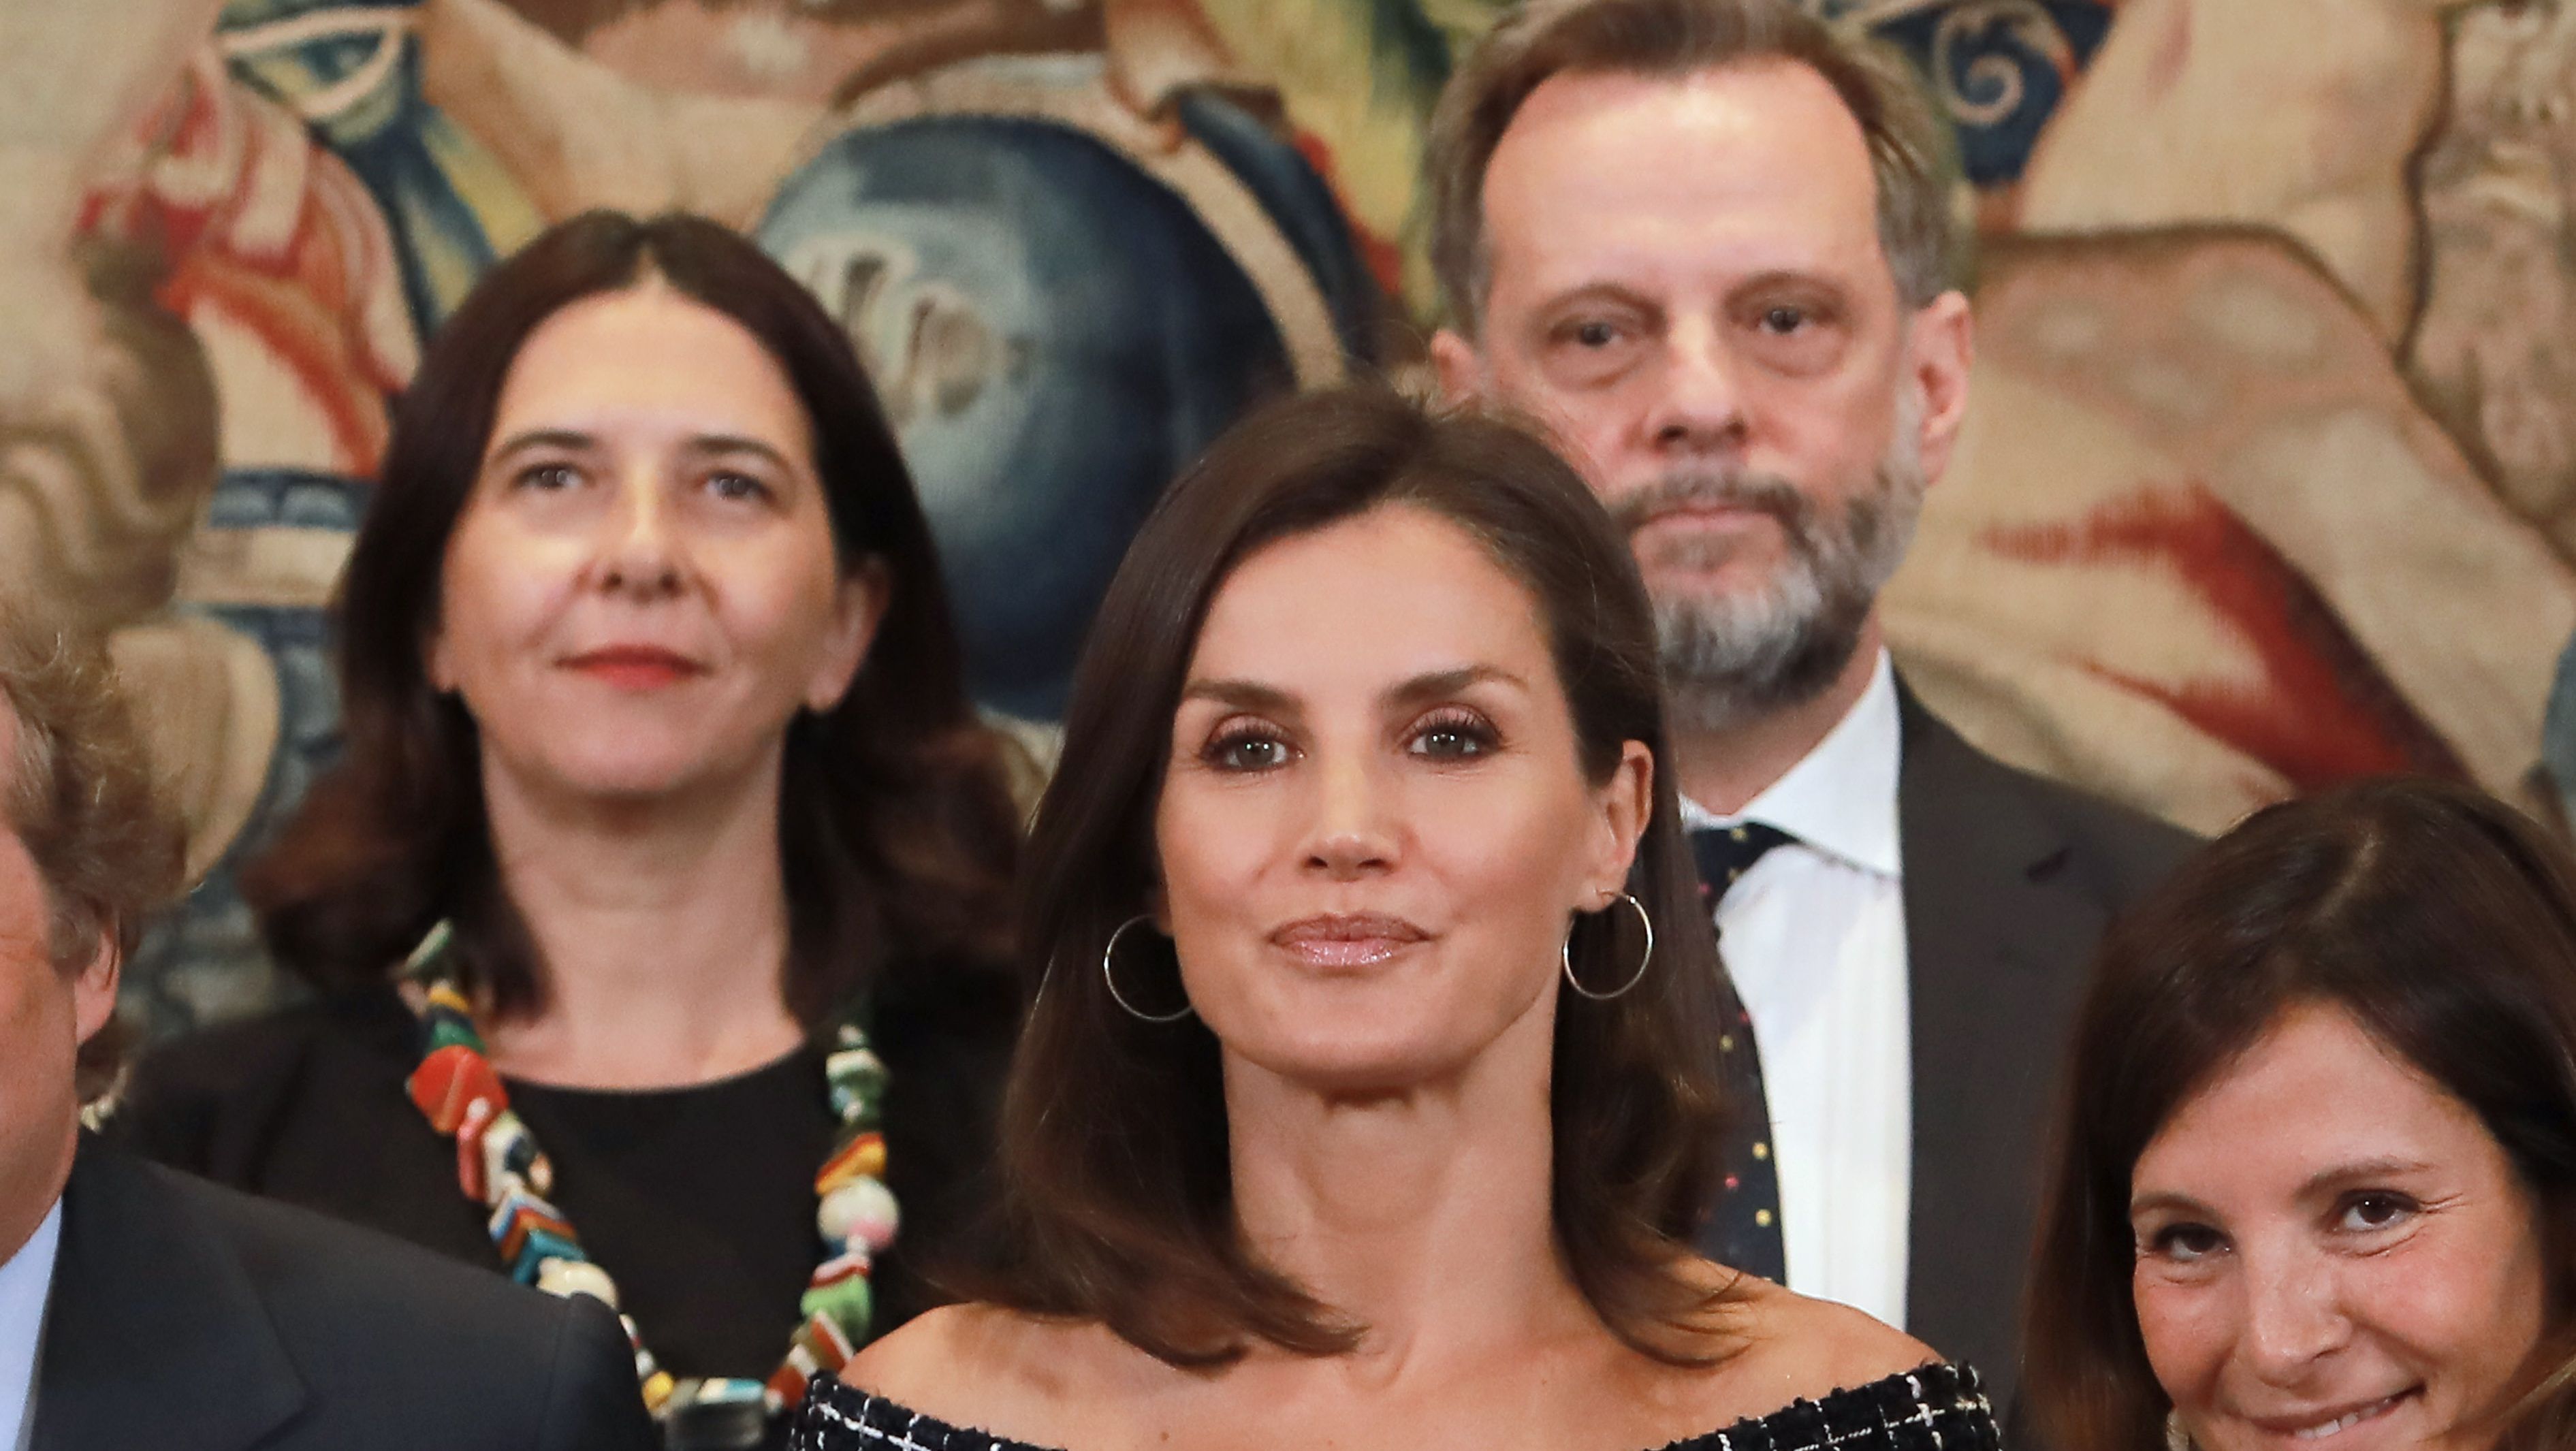 Queen Letizia of Spain Just Wore a $90 Zara Dress—and It's Still in Stock